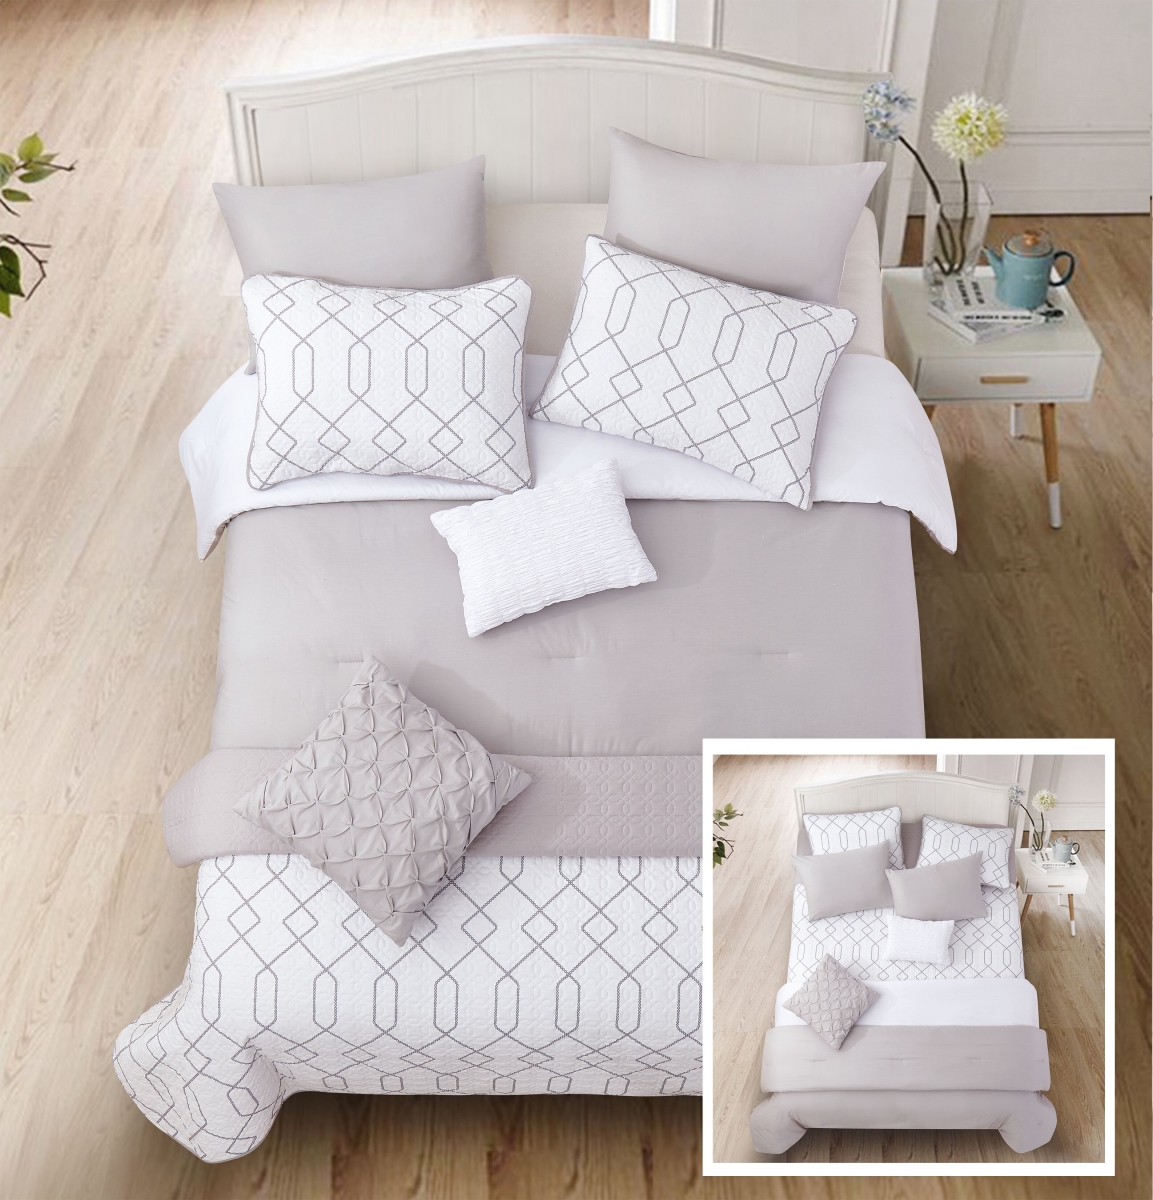 80346 Alexander Layered Comforter & Coverlet Set, Gray & White - Twin Size - 6 Piece